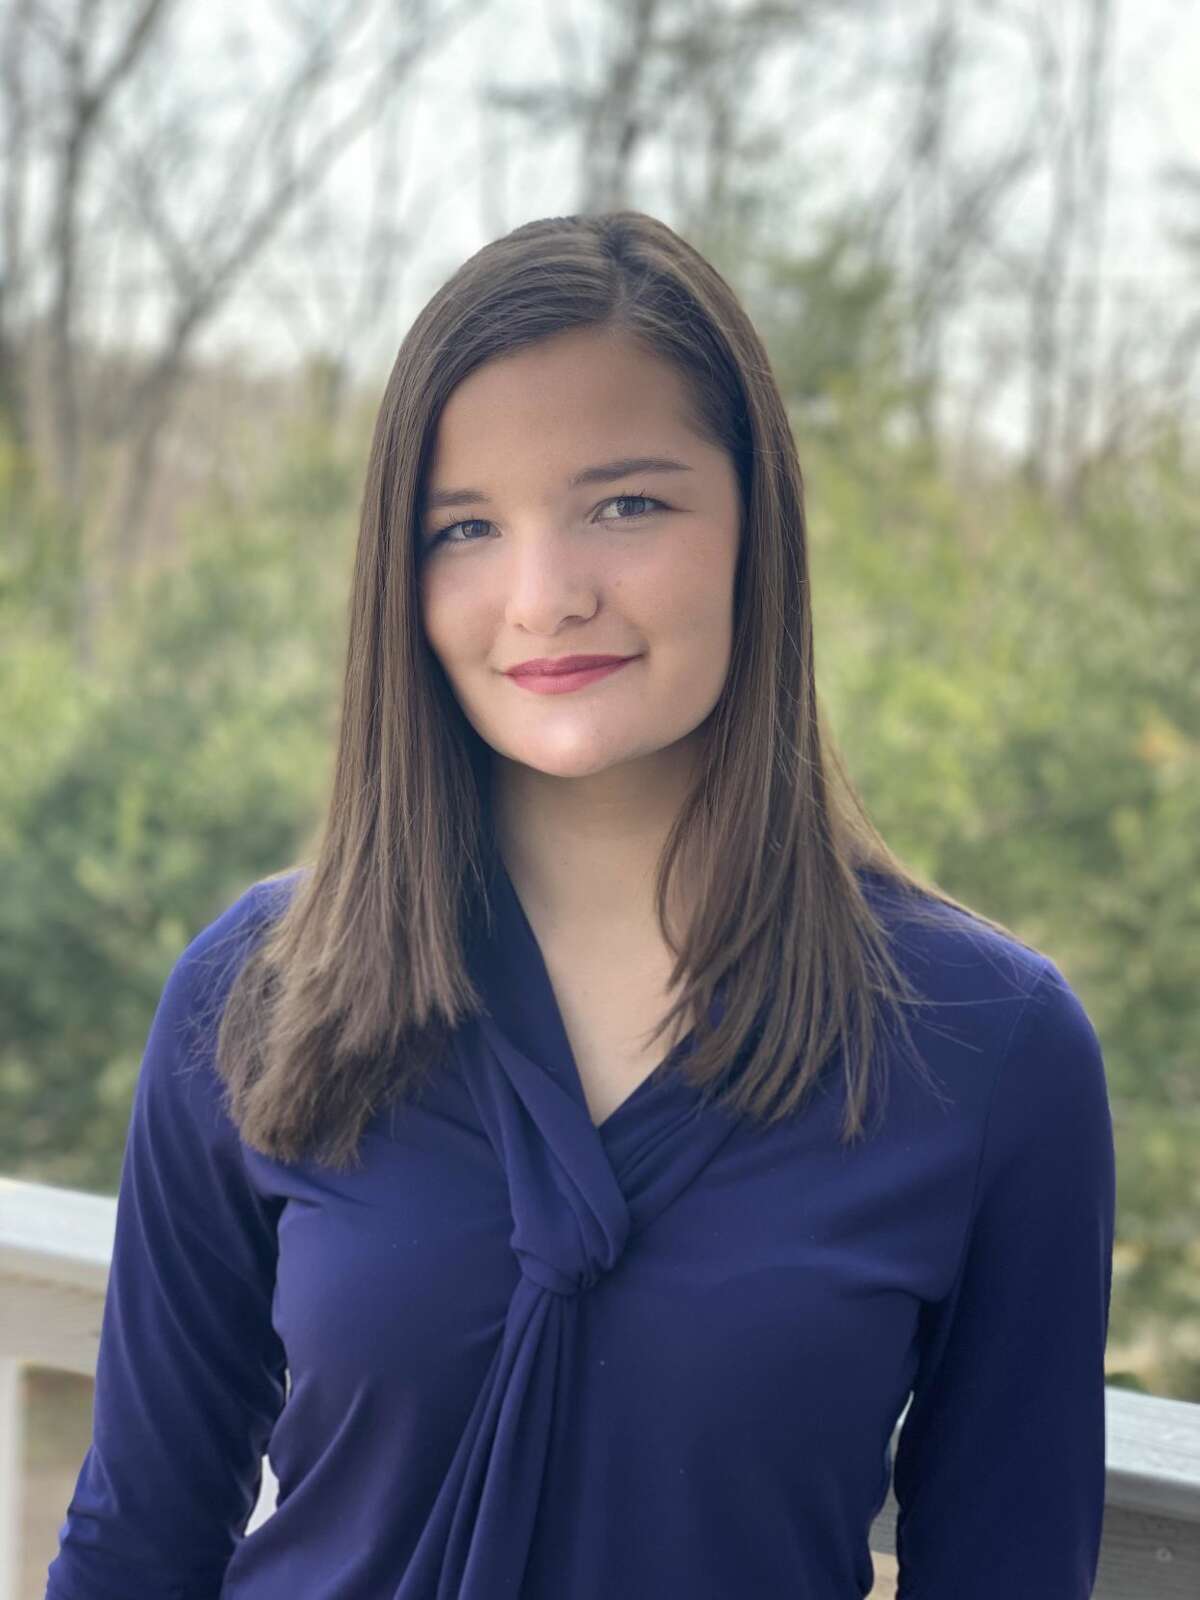 Lewis Mills sophomore Lauren Fitzgerald is a recipient of the Ensign-Darling Vocal Scholarship, a full scholarship vocal training program for a select number of high school-aged singers interested in classical and theatrical music.